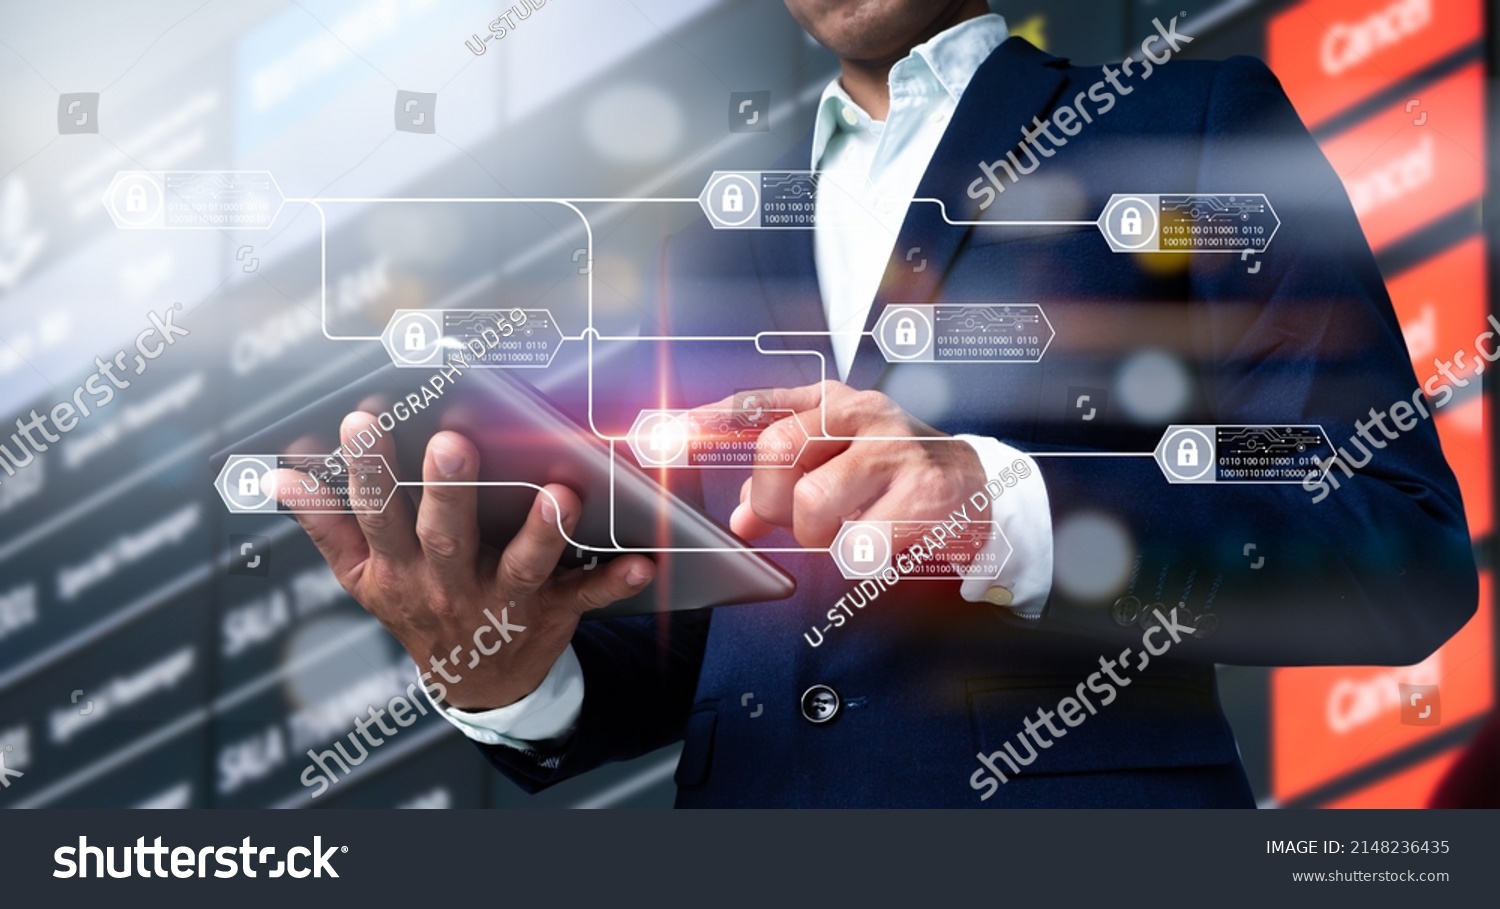 A chain diagram and encrypted blocks are used to demonstrate the blockchain technology idea. A businessman's hand holding a digital tablet, as well as a business plan and social media diagram. #2148236435